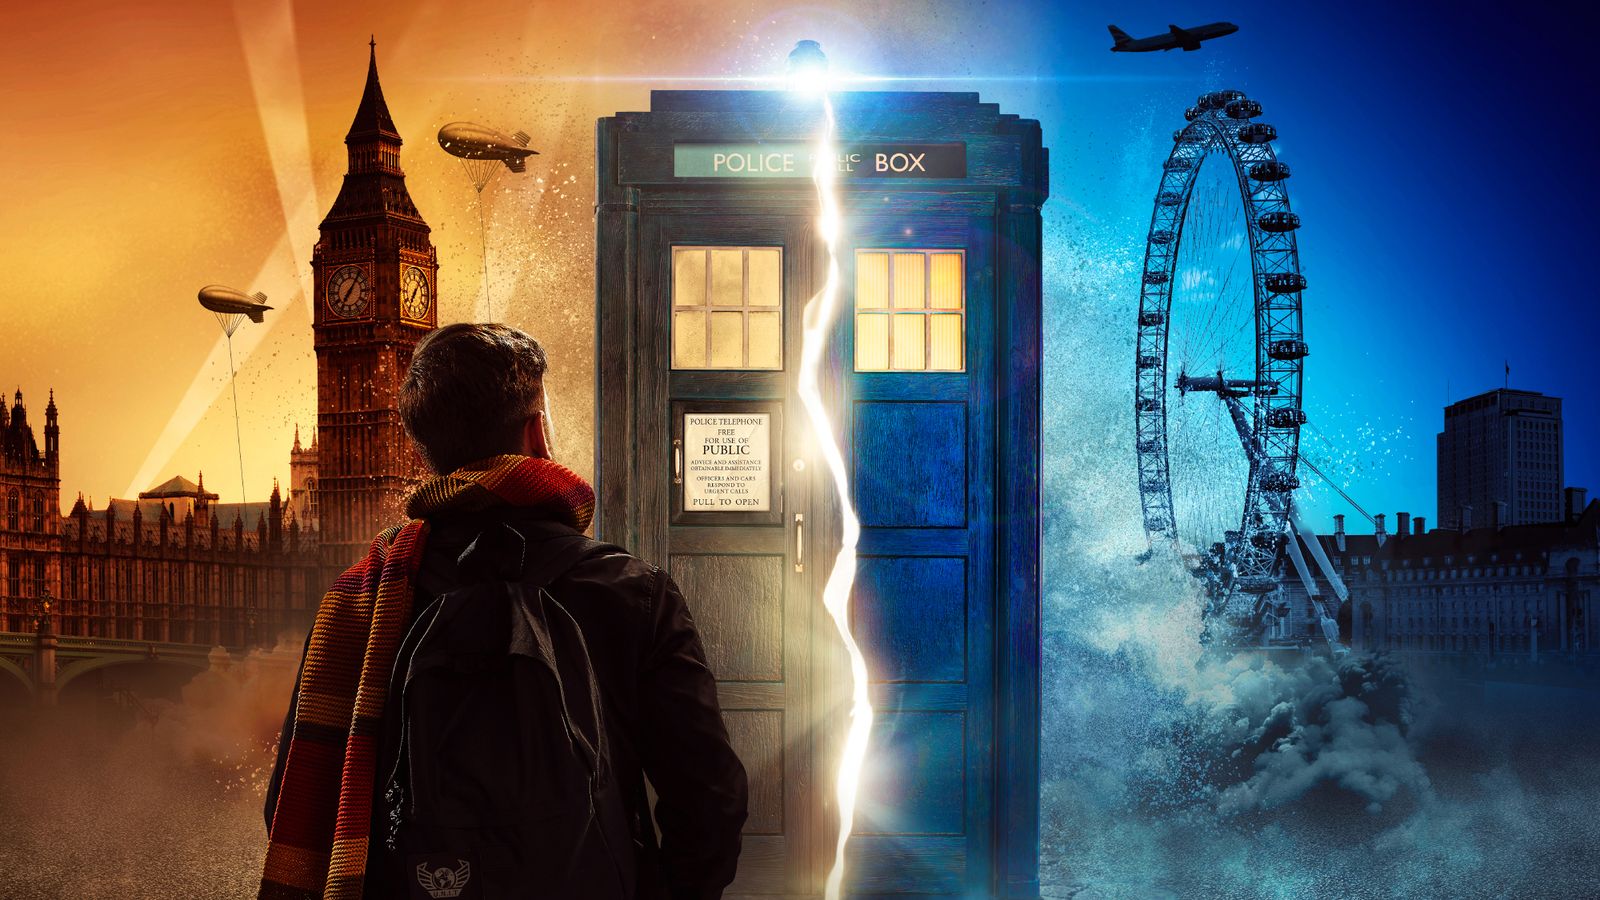 Doctor Who Ambitious immersive theatre show announced giving fans